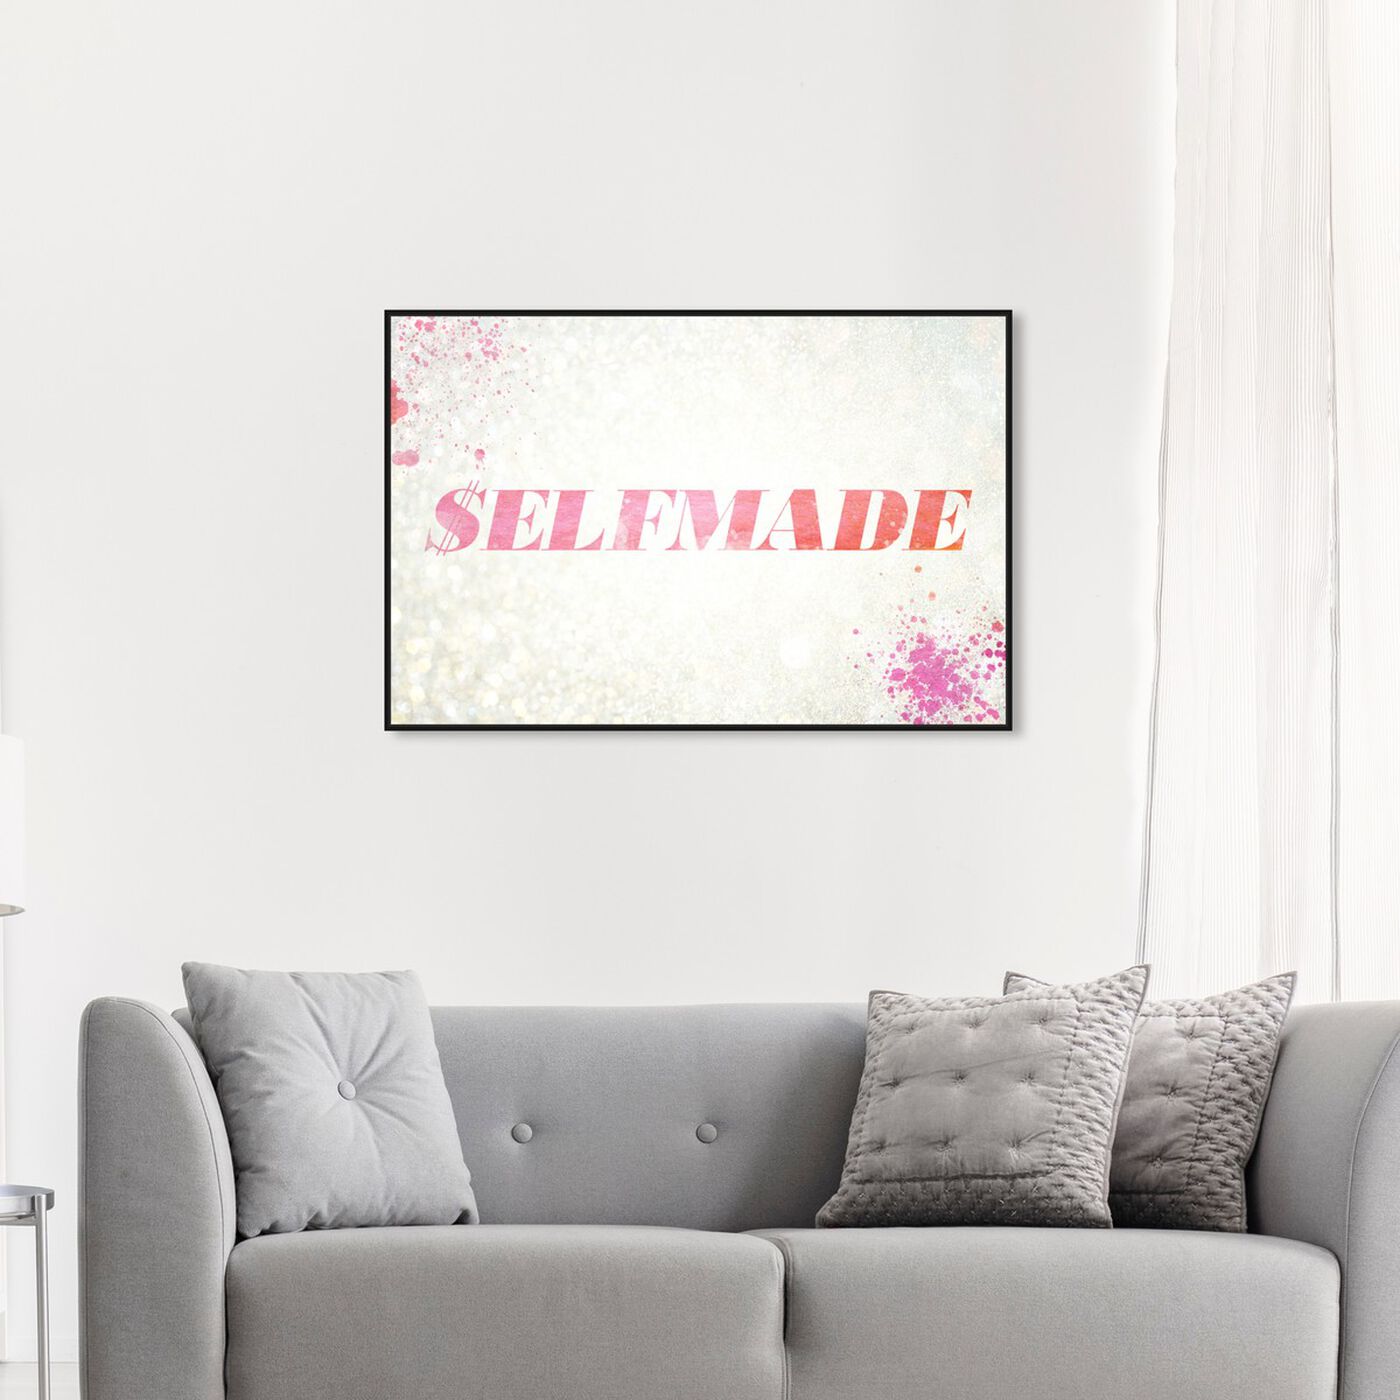 Hanging view of $elfmade Coral featuring typography and quotes and quotes and sayings art.